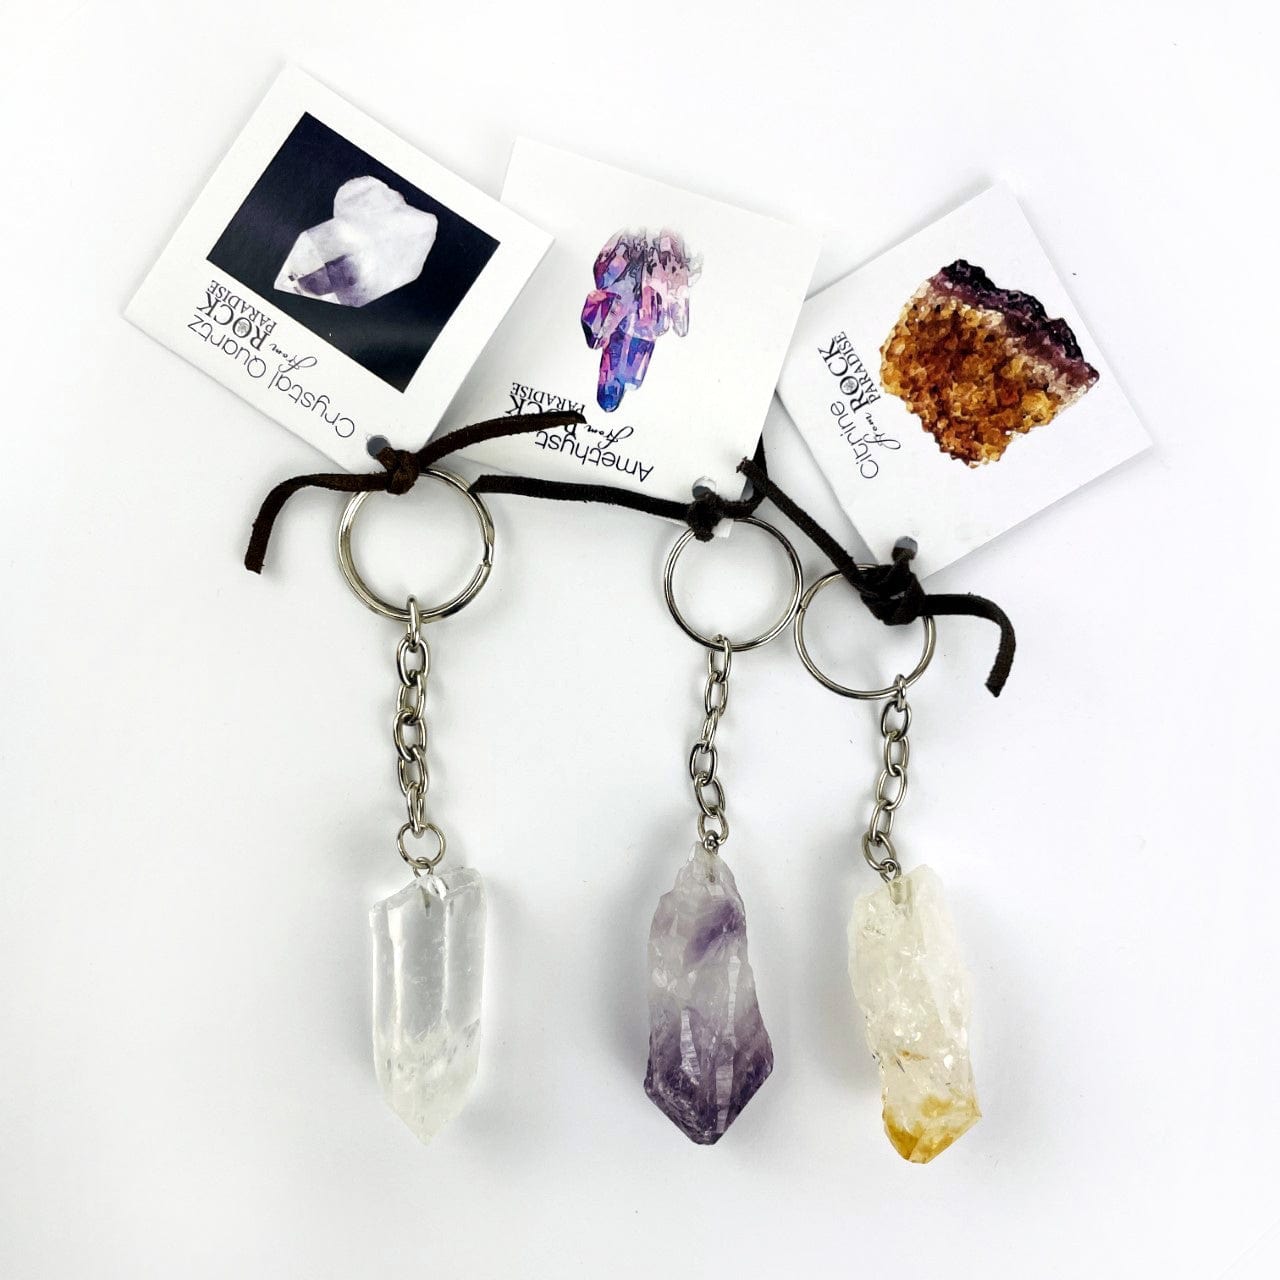 One of each of the Crystal Quartz Point, Amethyst point and Citrine Point keychains